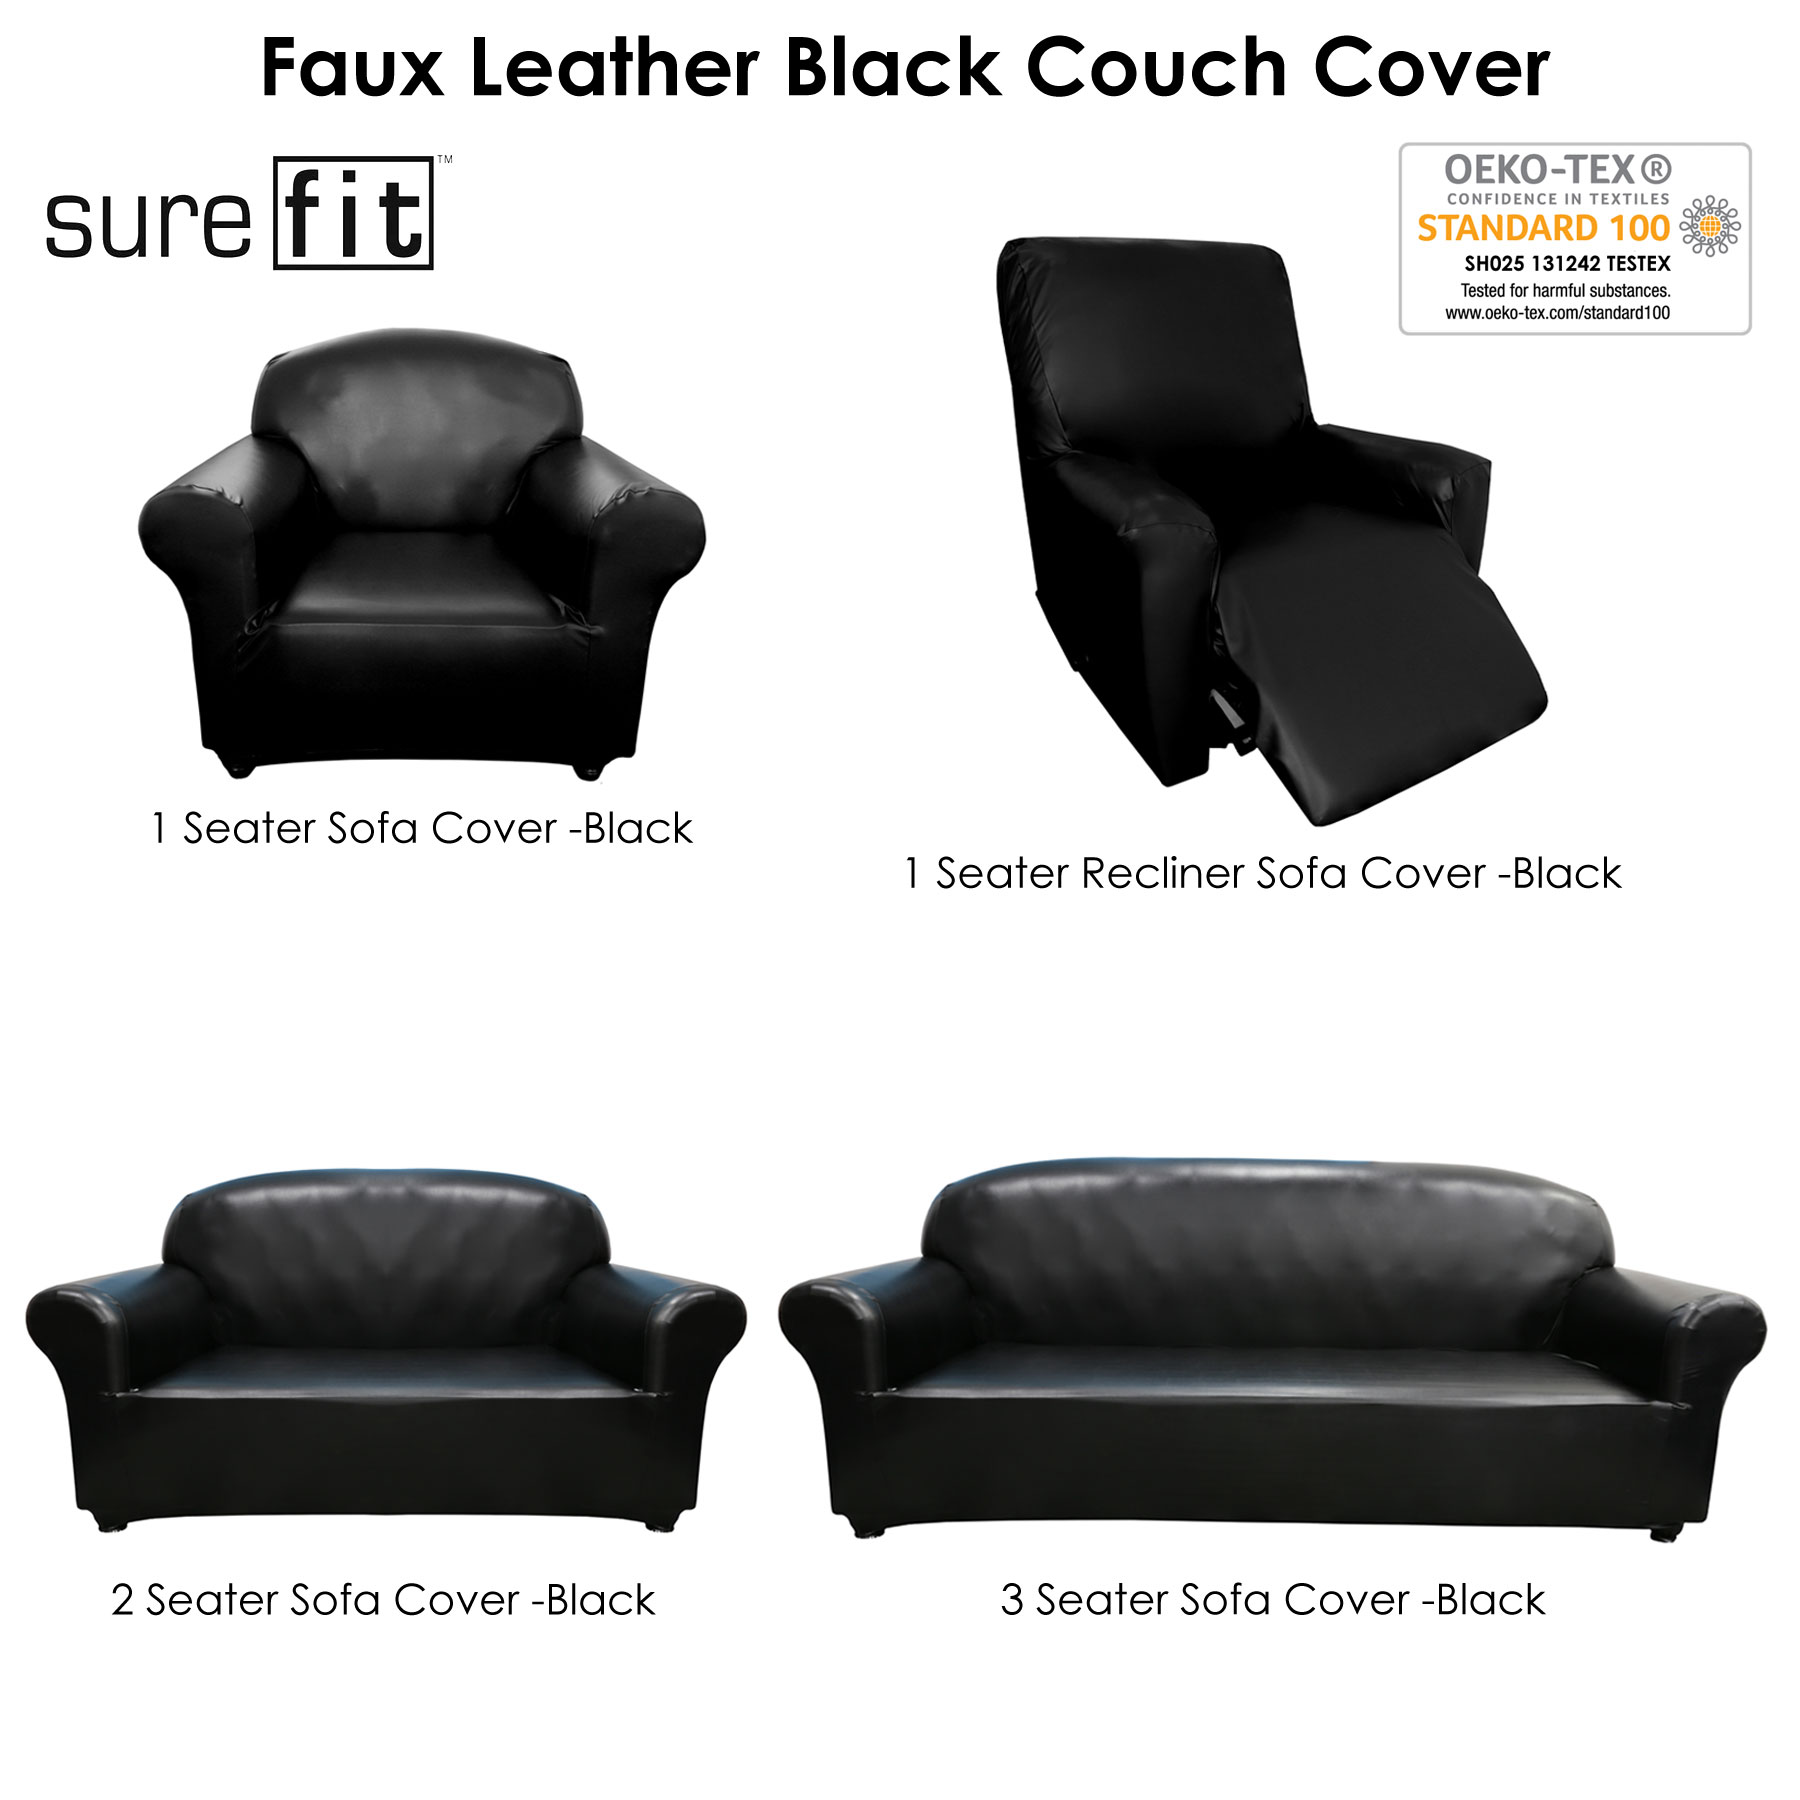 Couch Cover For Reclining Leather, Couch Covers For Leather Couch